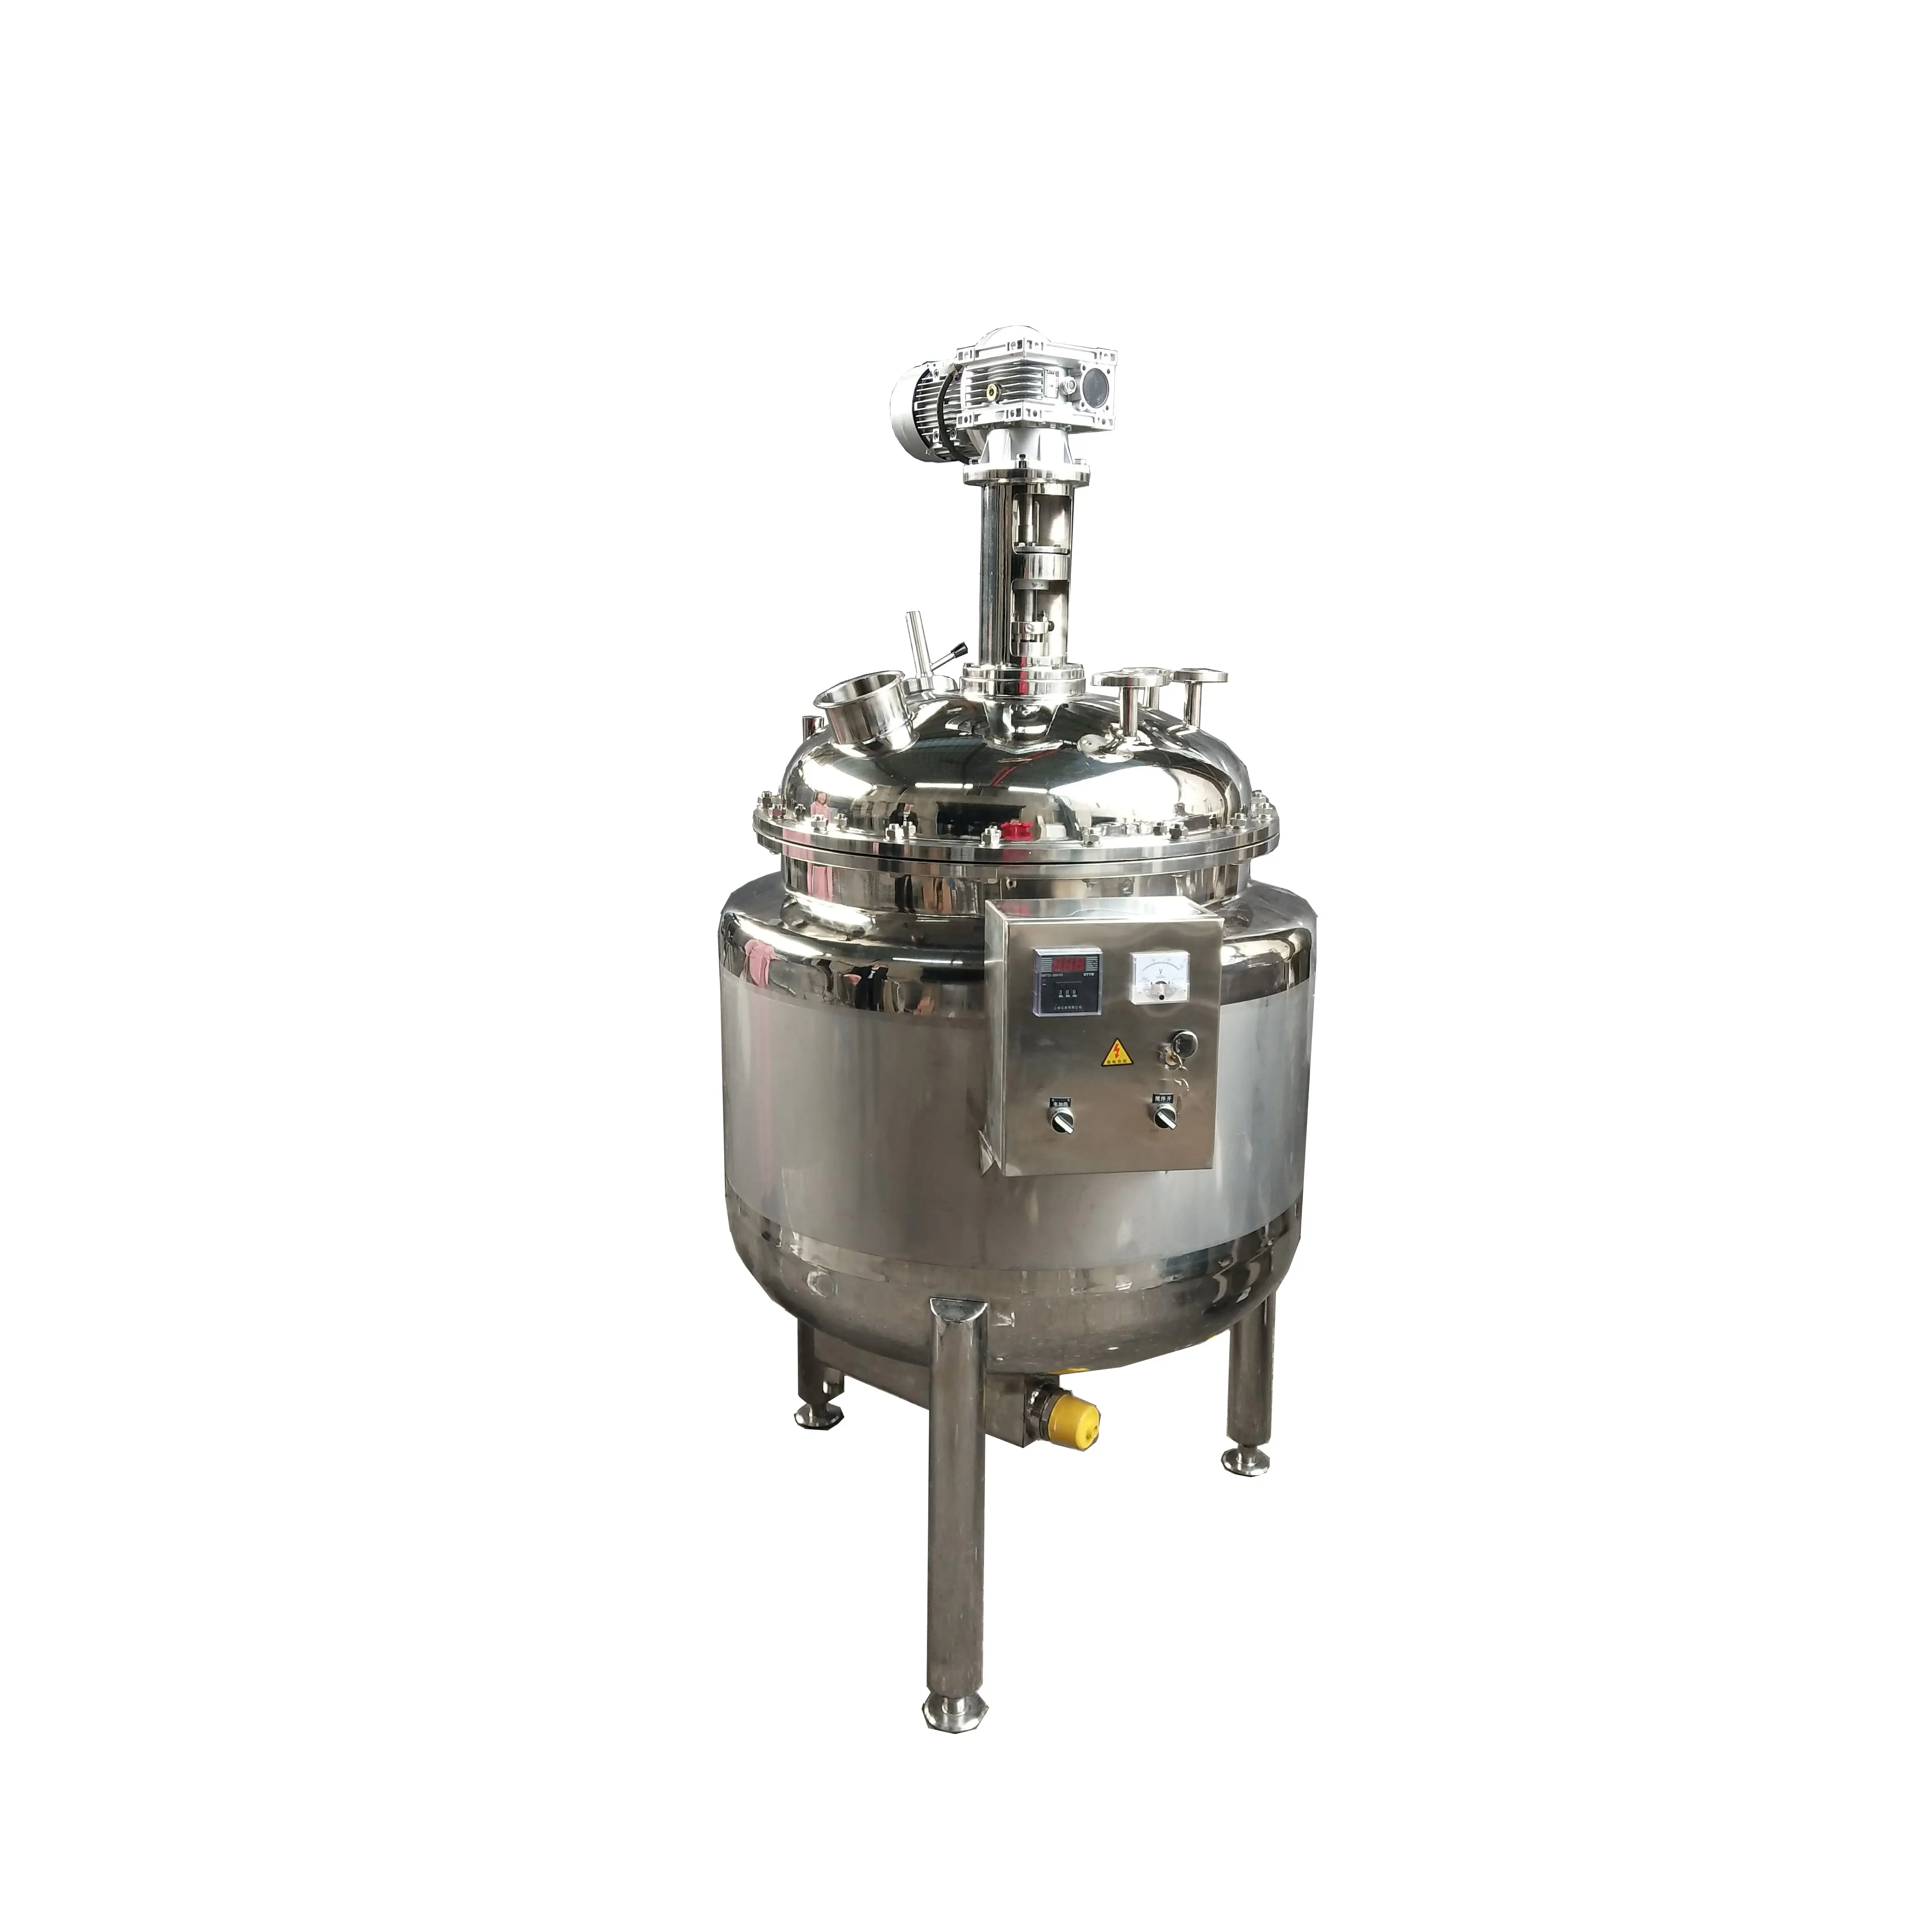 capstyle jacket chemical reactor 50l with CE certificate